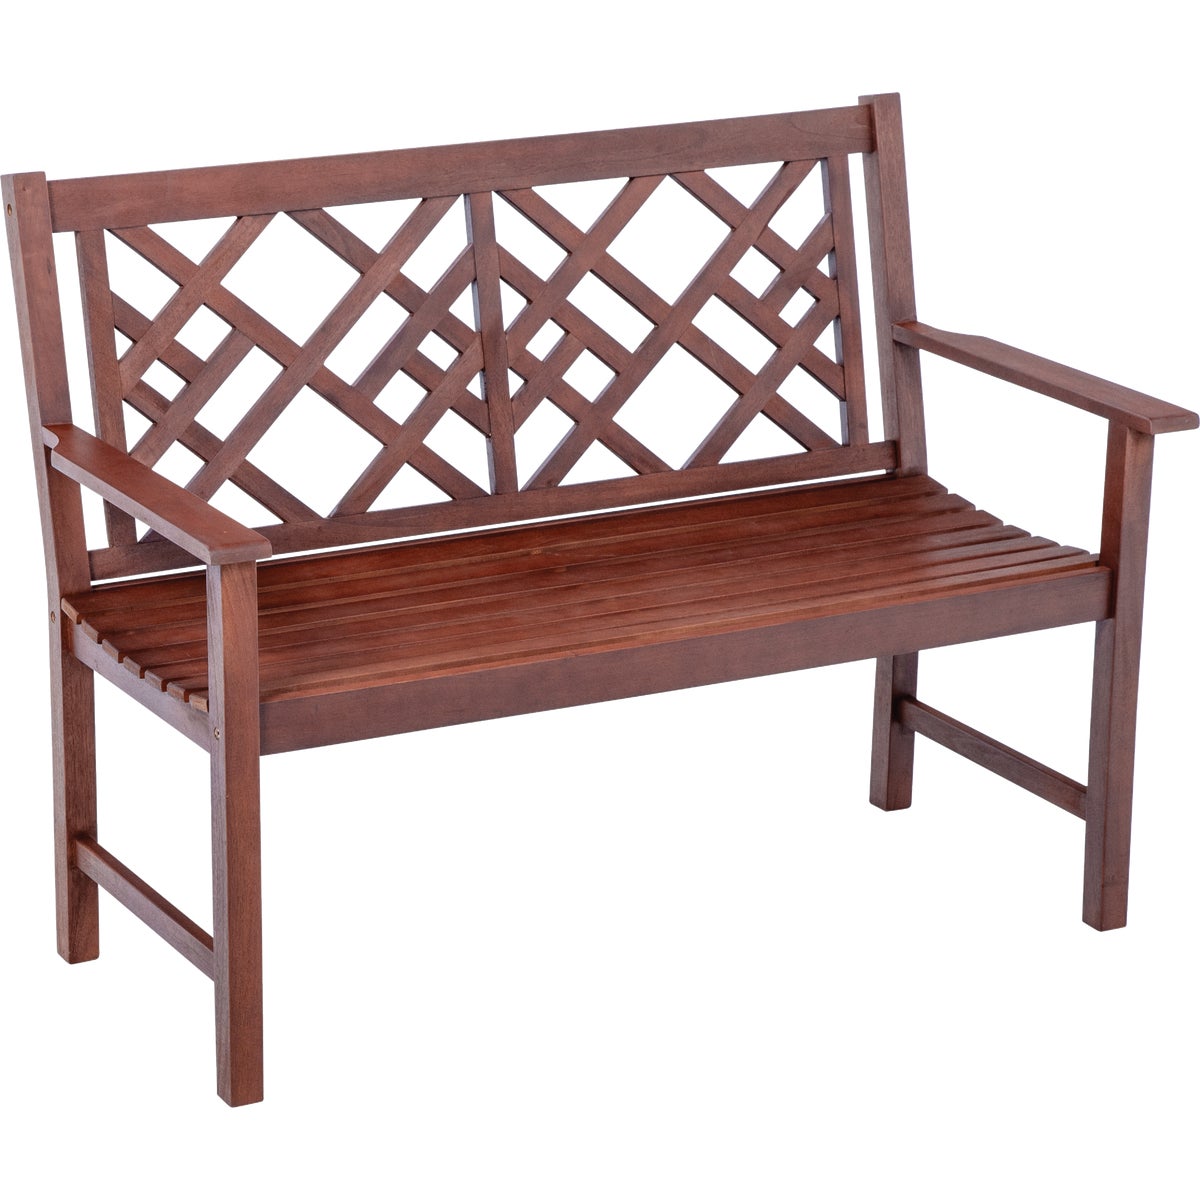 Jack Post 4 Ft. L. Hardwood Bench with Decorative Back in Oil Finish